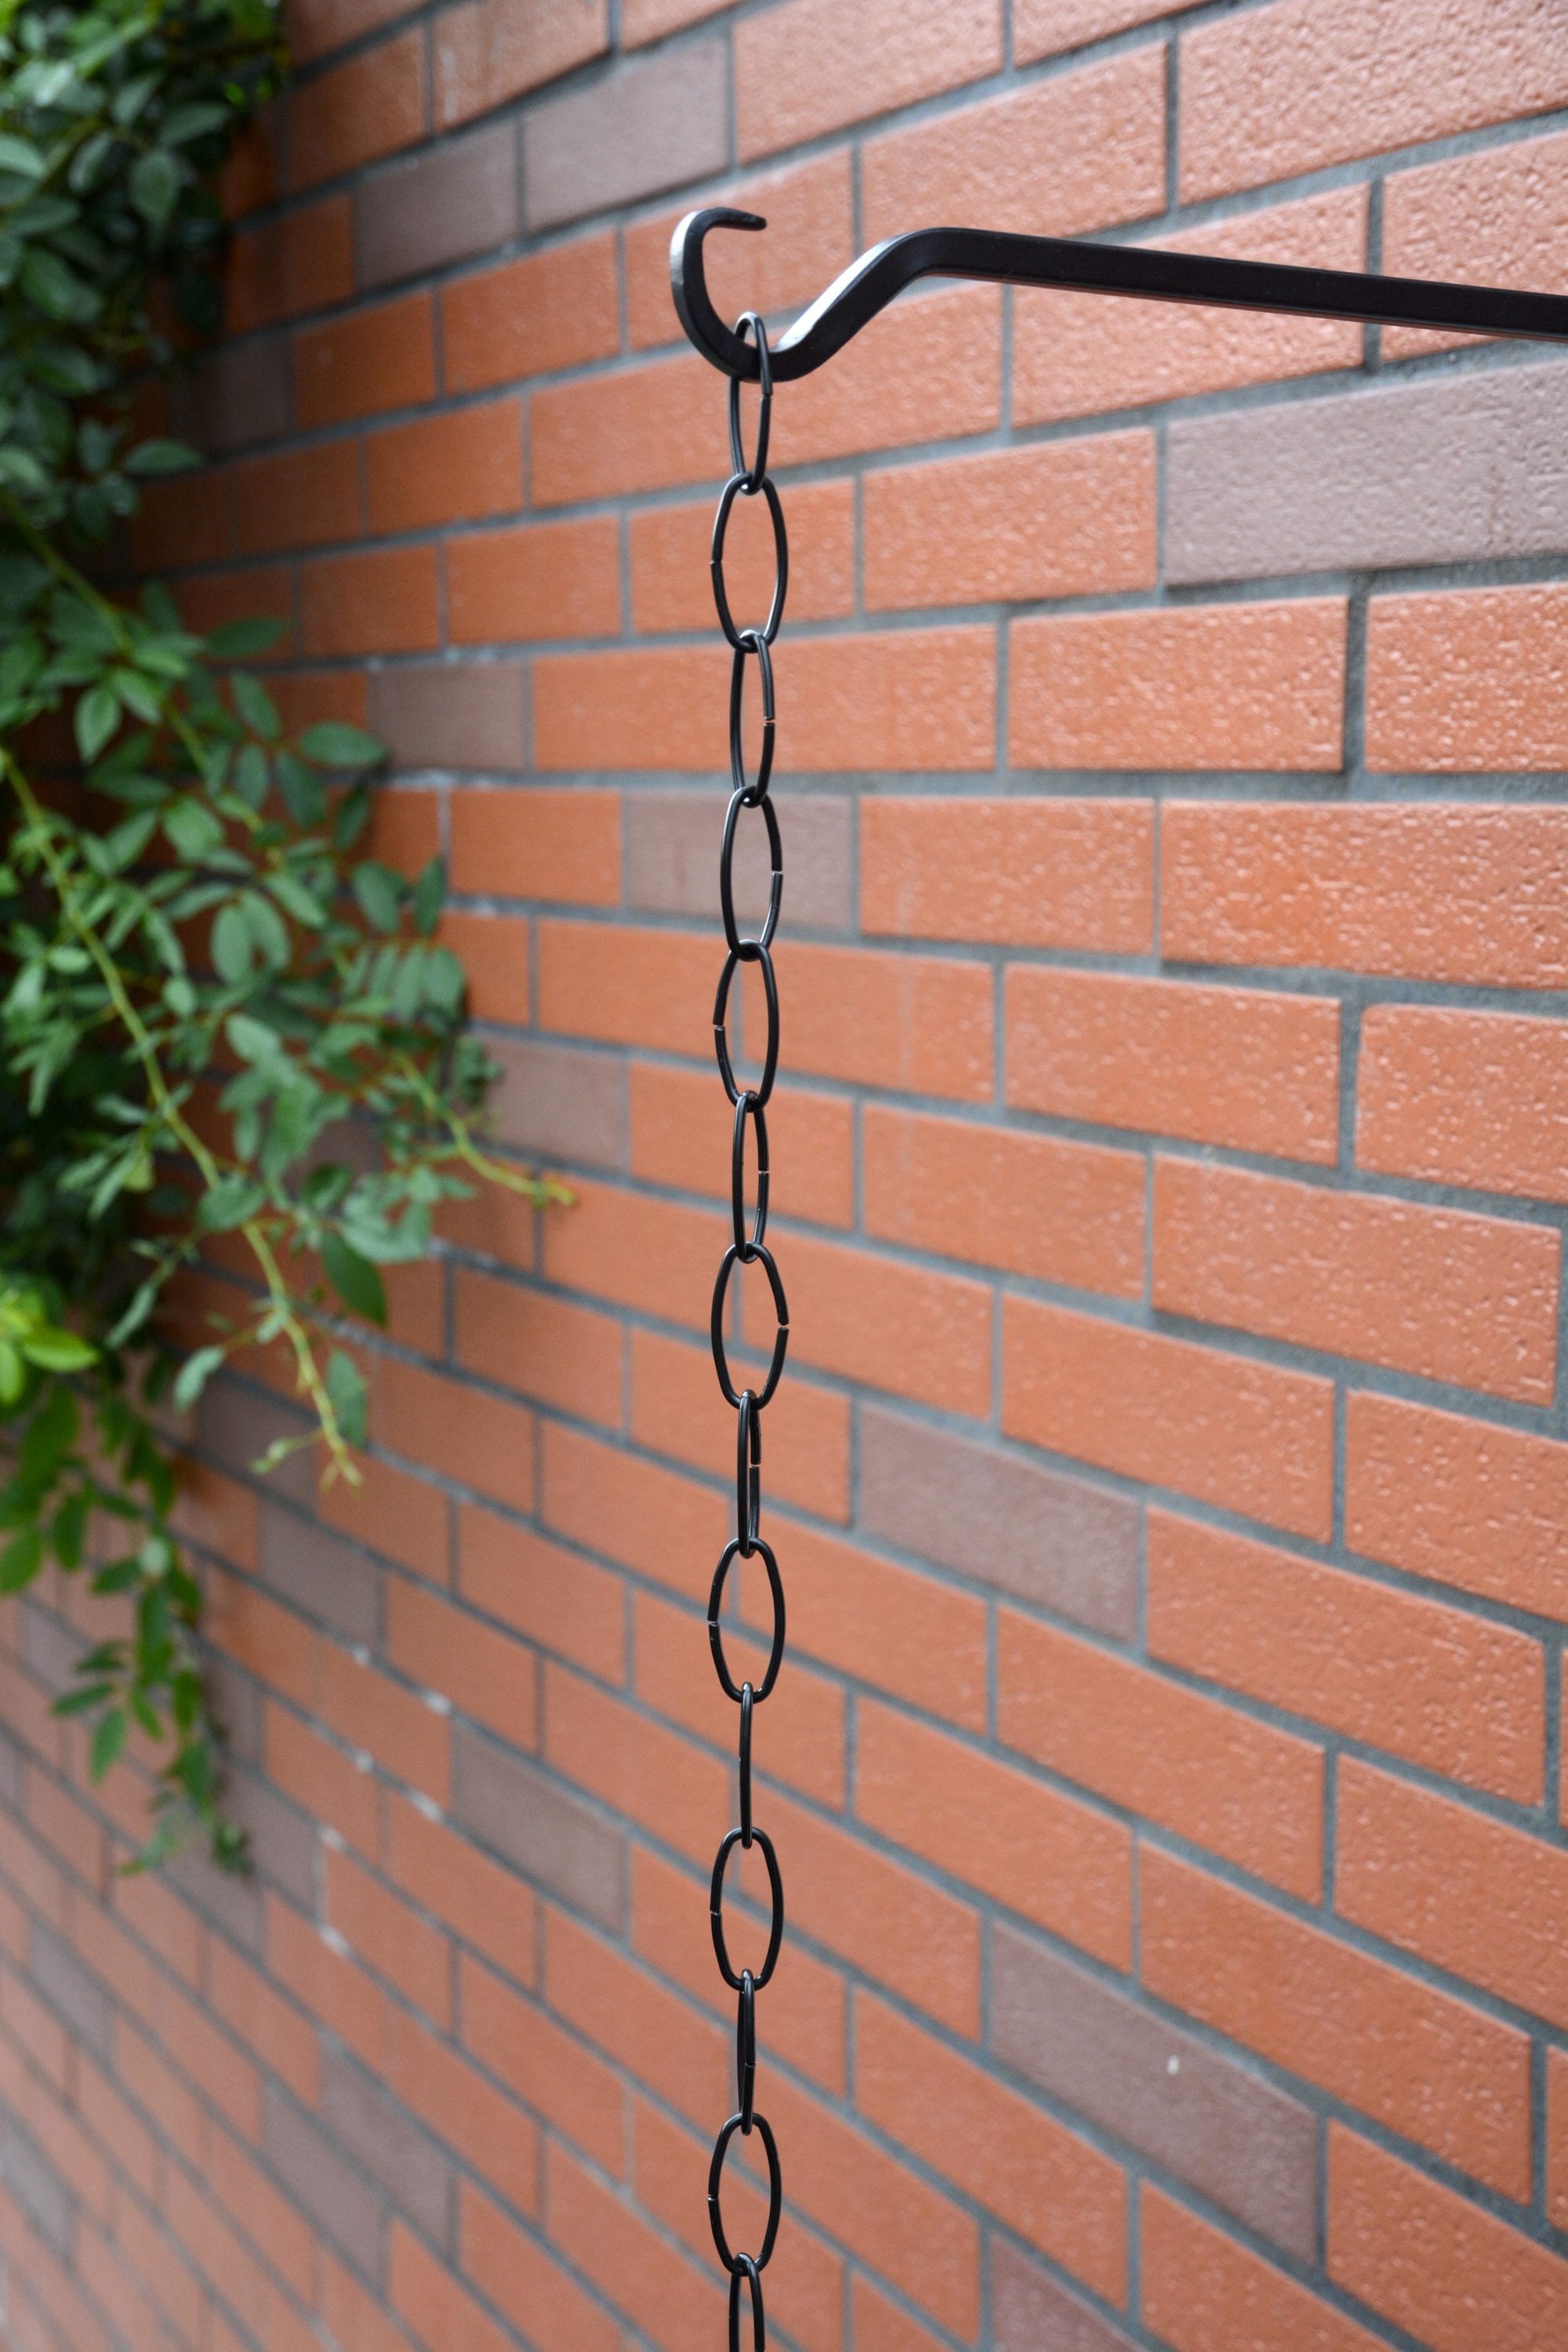 Hanging Basket Extender Chain, Black, 36-In. - Danbury, CT - New Milford,  CT - Agriventures Agway Pickup & Delivery